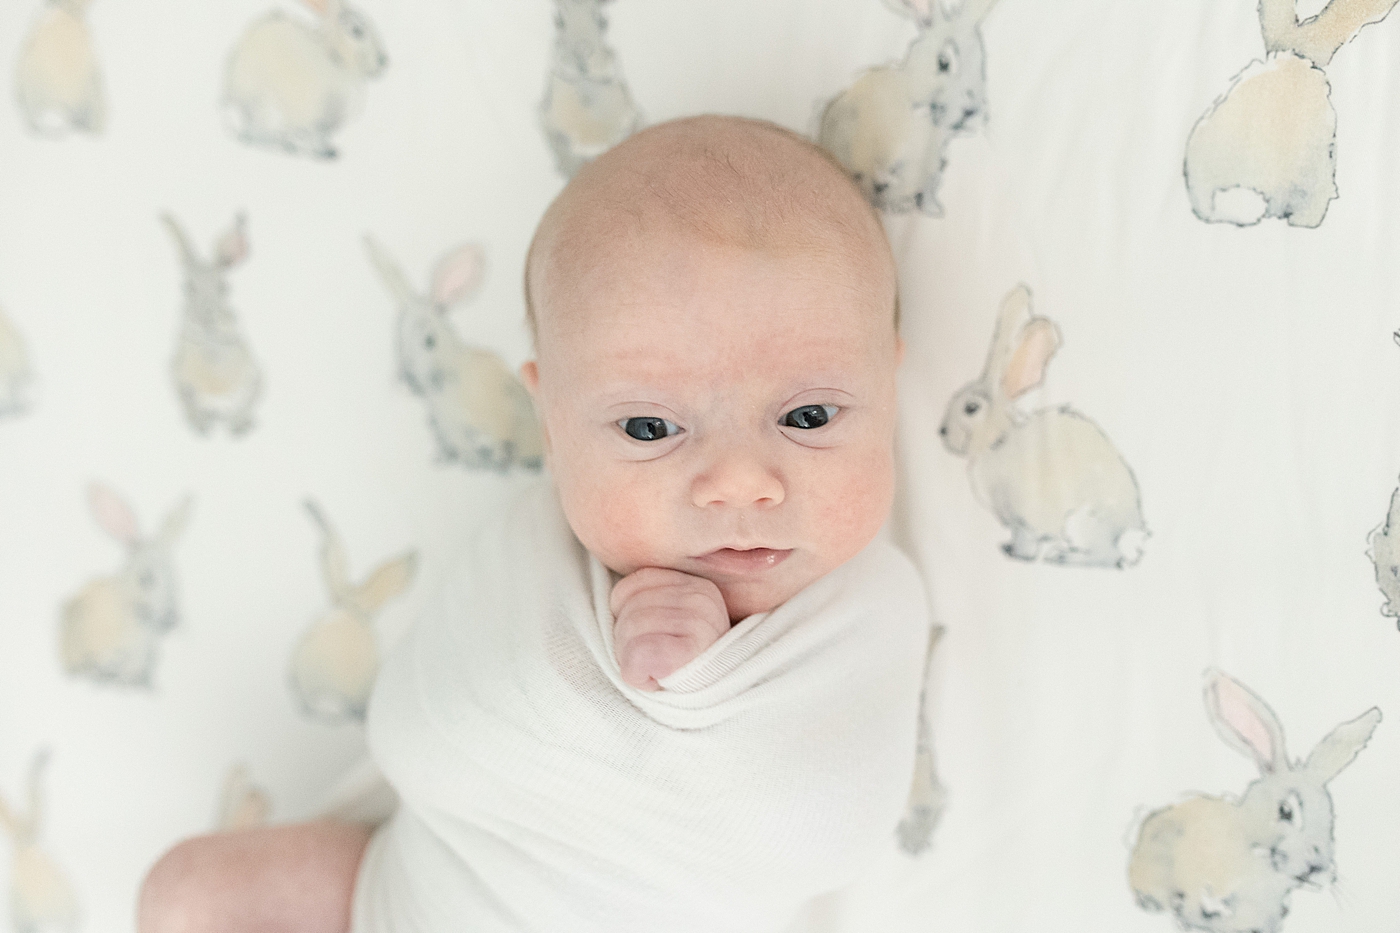 Newborn wrapped in white swaddle on bunny sheets | Photo by Pascagoula NB photographer Little Sunshine Photography